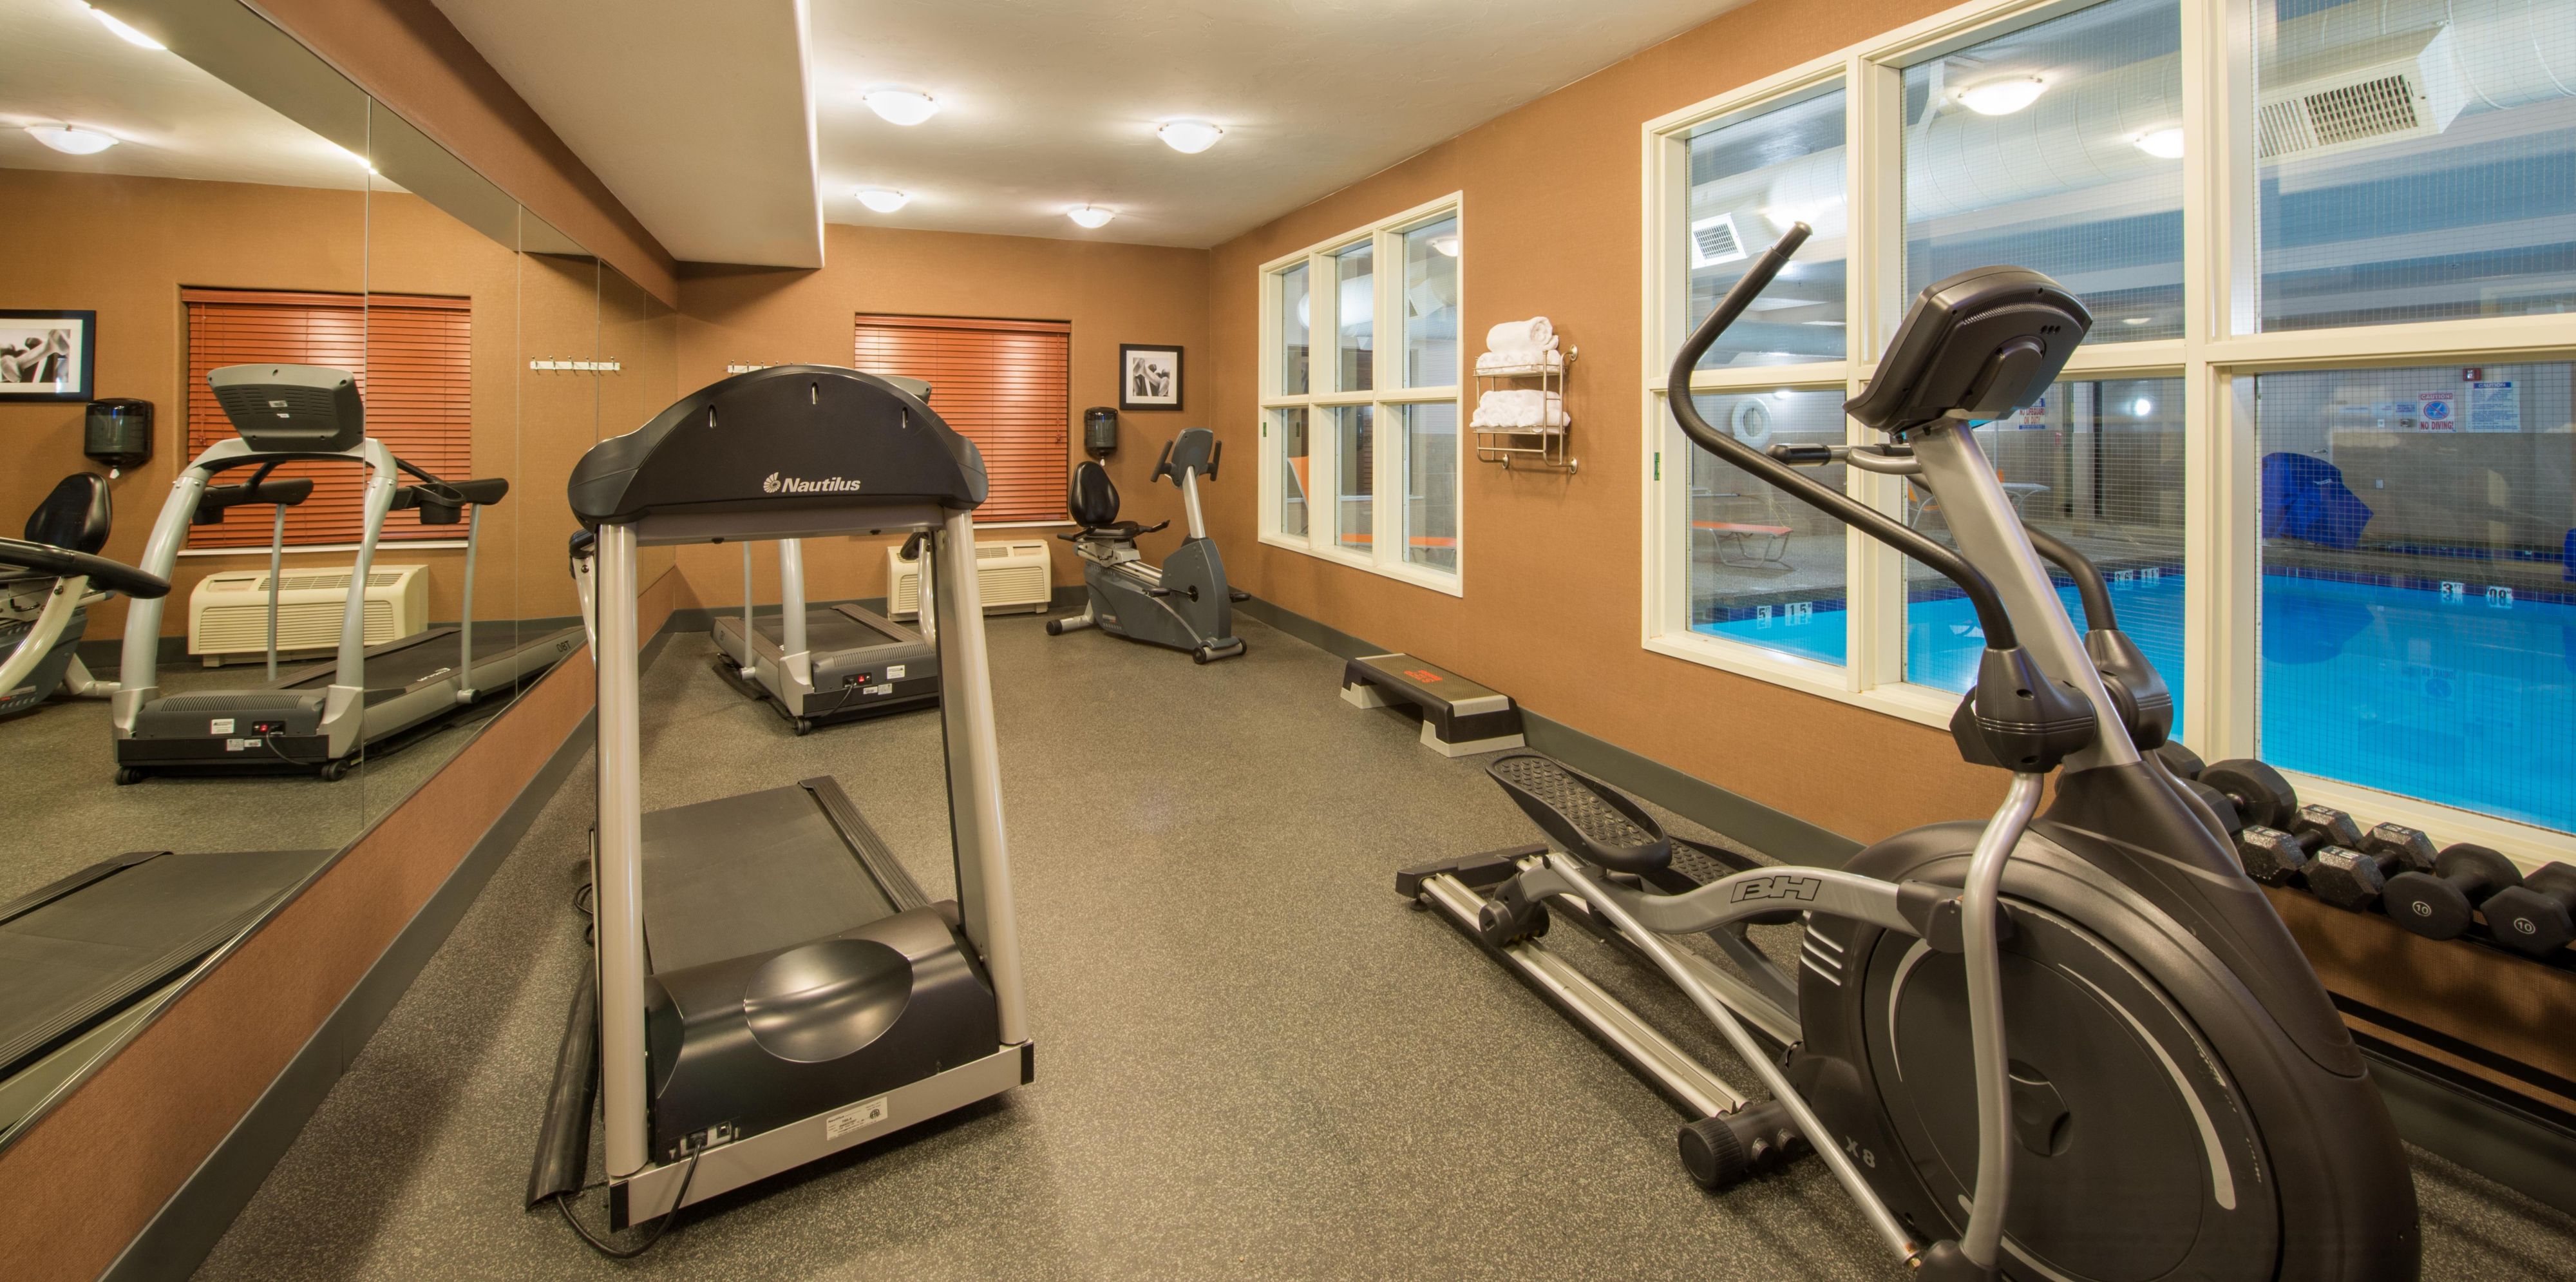 Relax those muscles after a workout in our 24-hour gym in our 102 hot tub. 